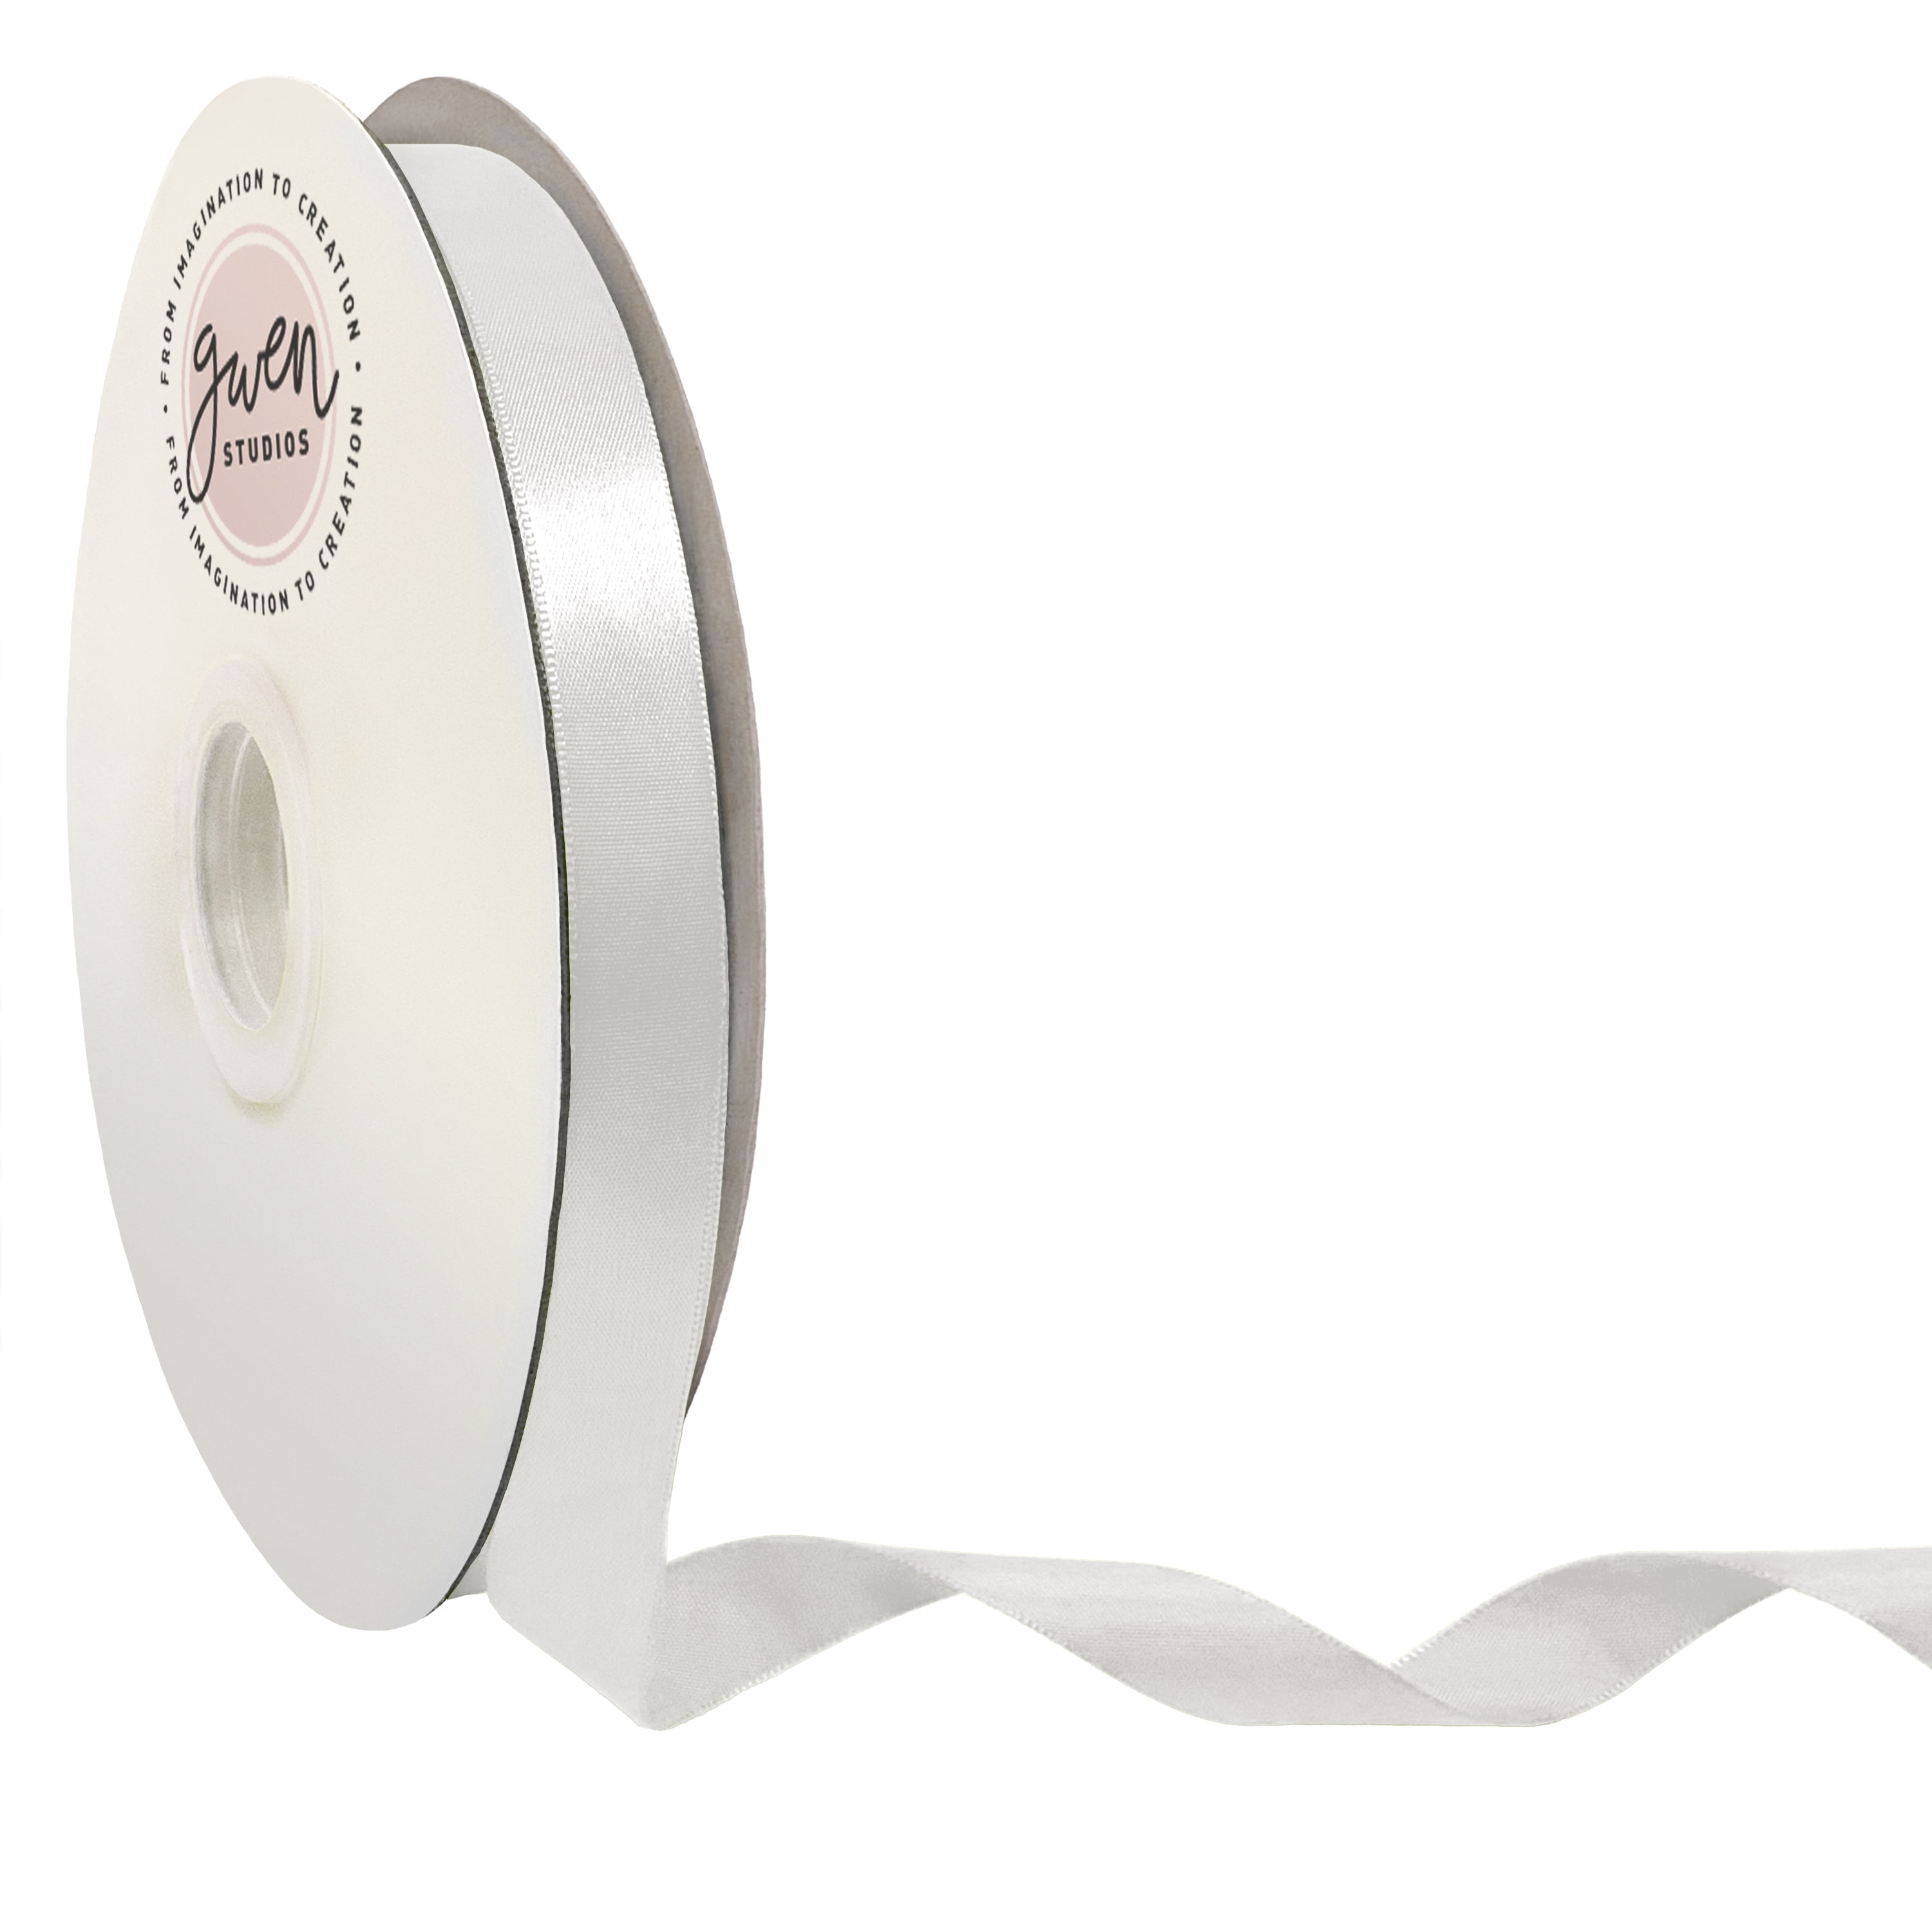 White Double Faced Satin Ribbon for Wedding and Crafts, 2.5 inch x 50 Yards by Gwen Studios